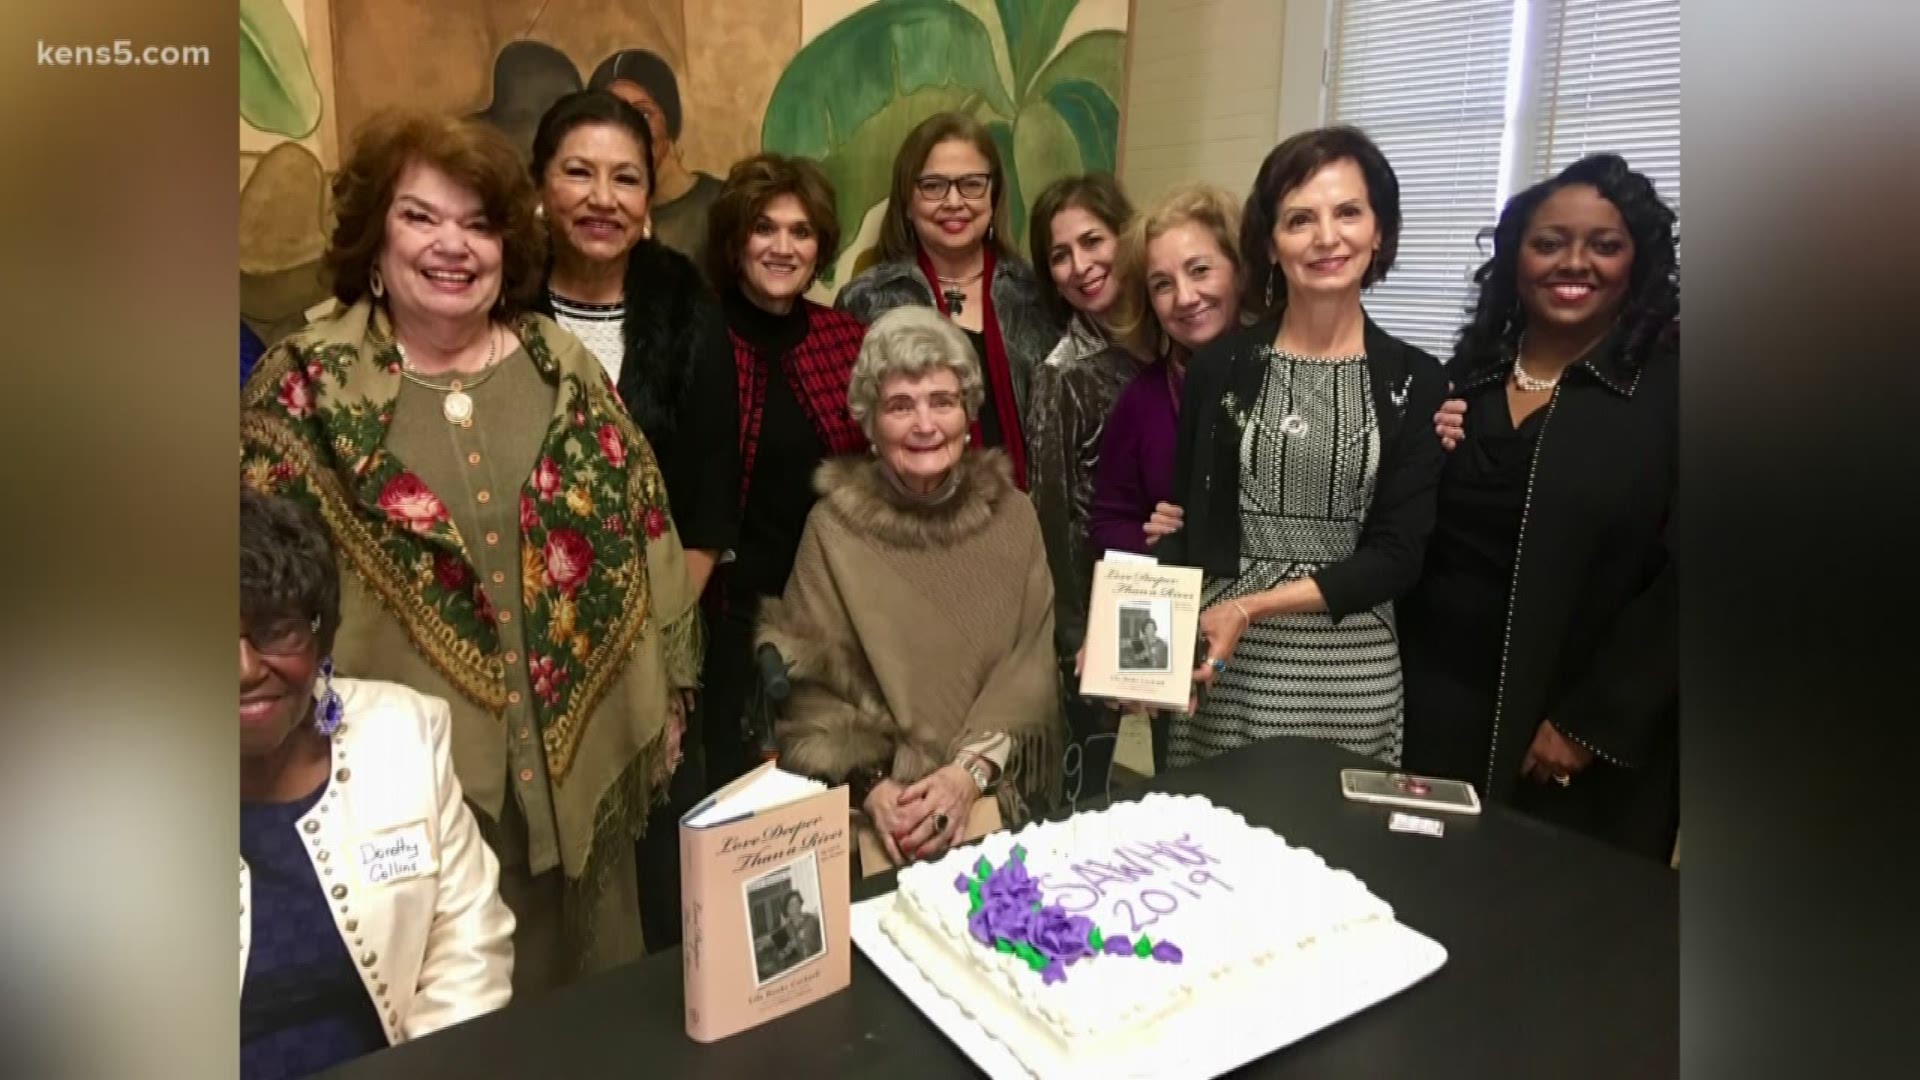 Members of the San Antonio Women's Hall of Fame helped the first female mayor of San Antonio celebrate her 97th birthday Saturday.